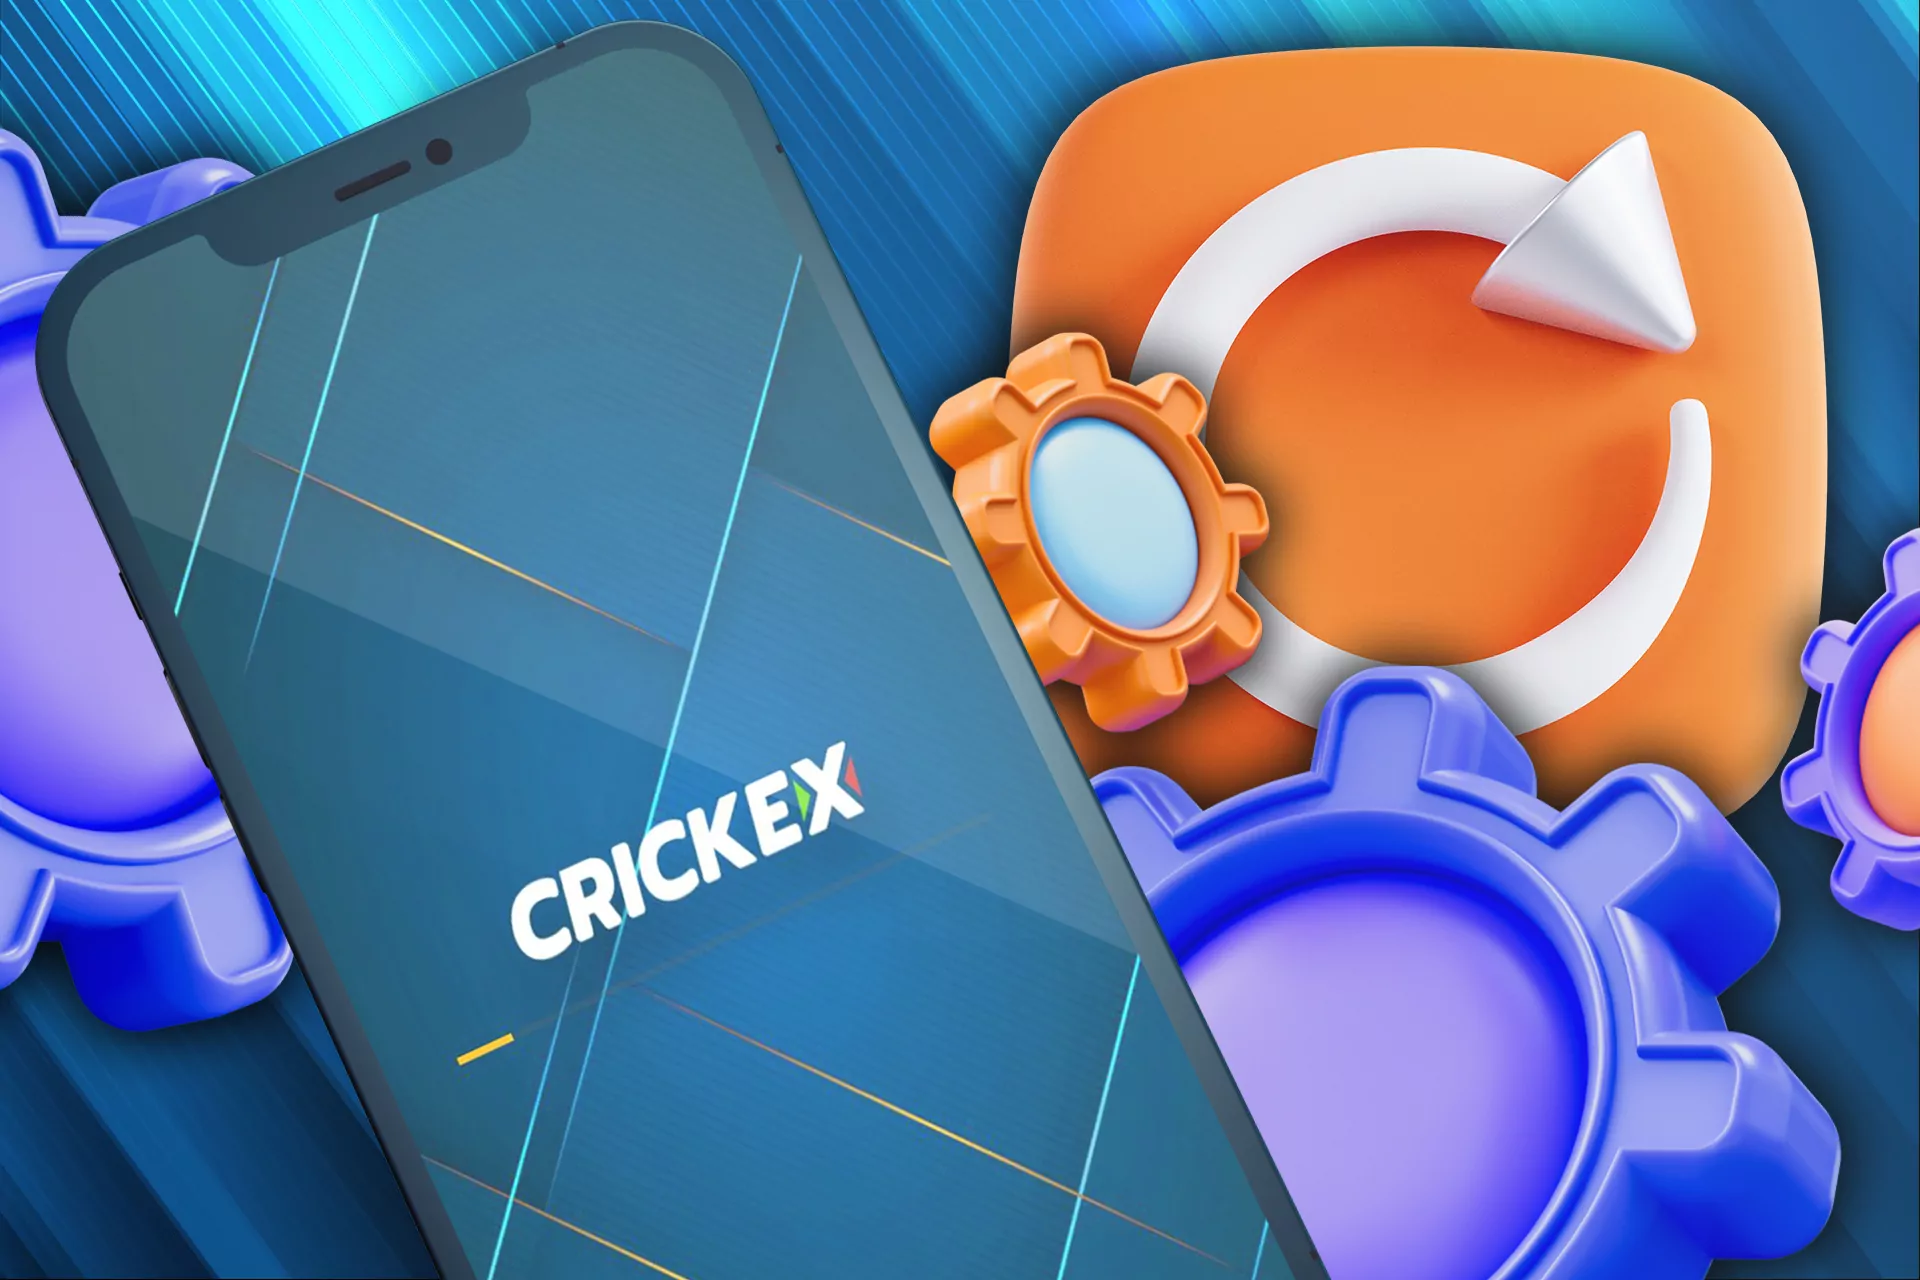 Keep you Crickex app updated and it will work correctly.